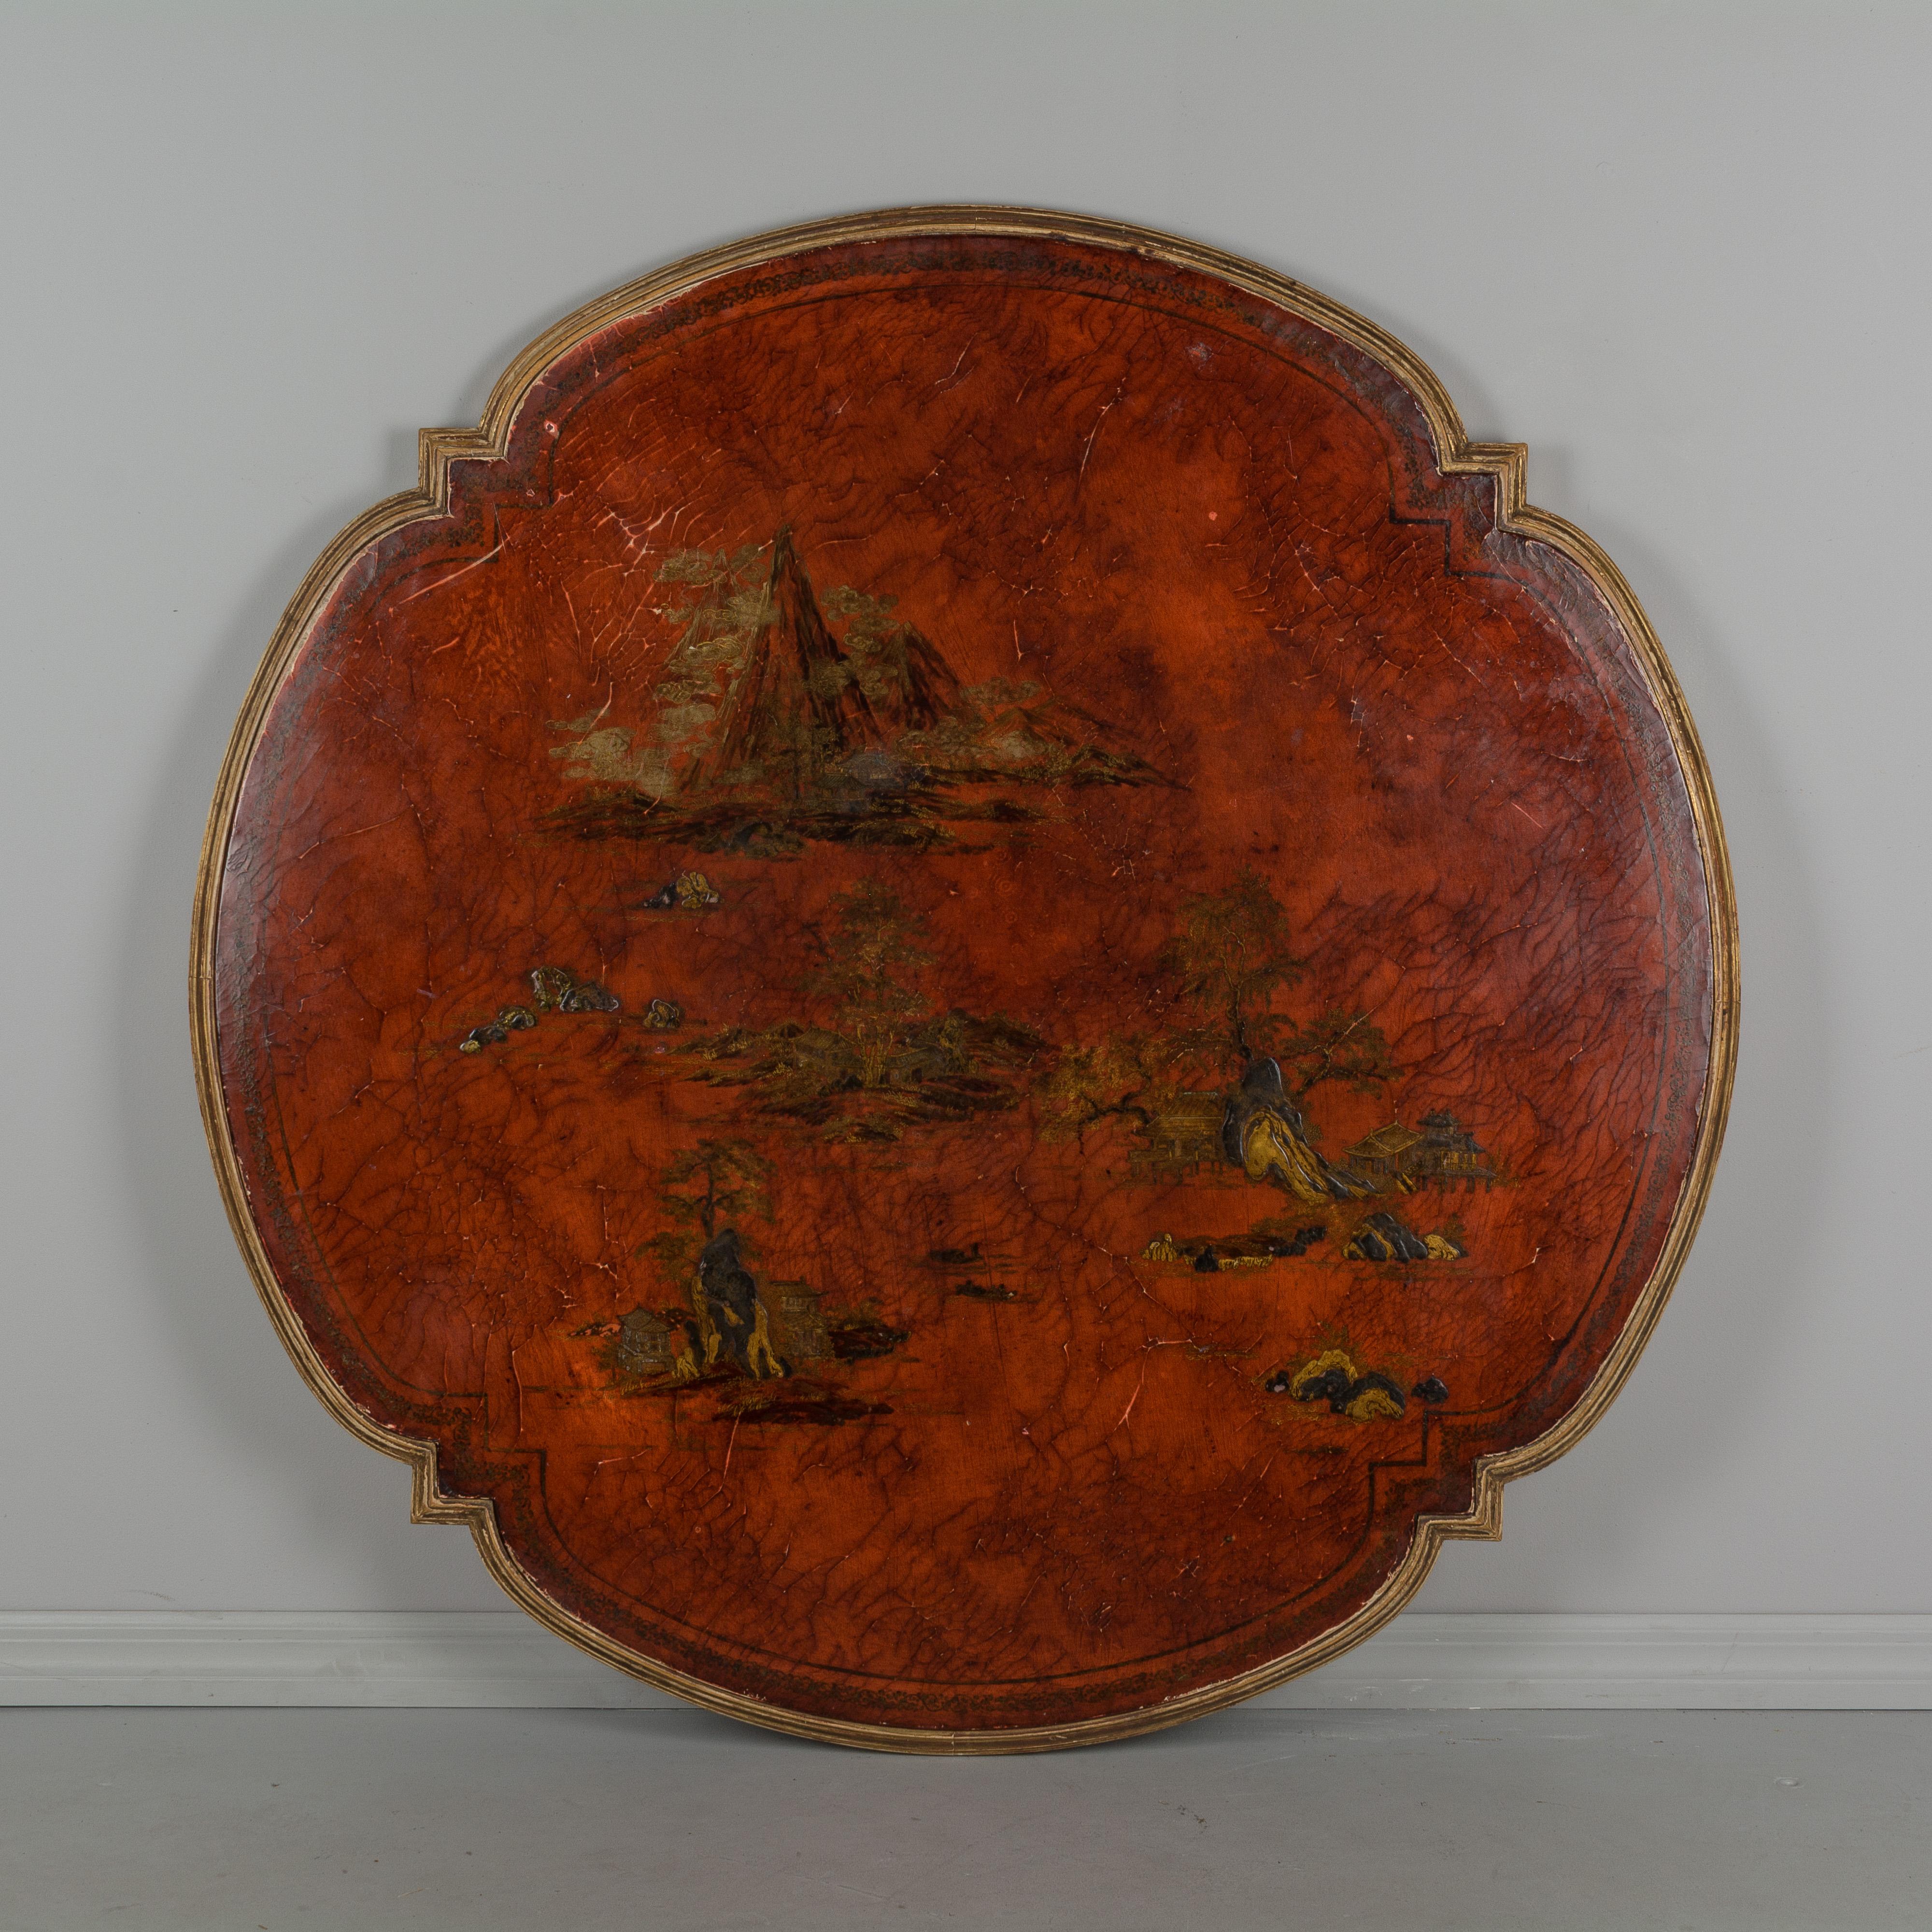 A French chinoiserie Guéridon, or center table, with parcel giltwood base and red lacquer top. Ornately carved base with gilded foliate relief on pale green ground. The top has landscape vignettes that are slightly raised and accented in gold.